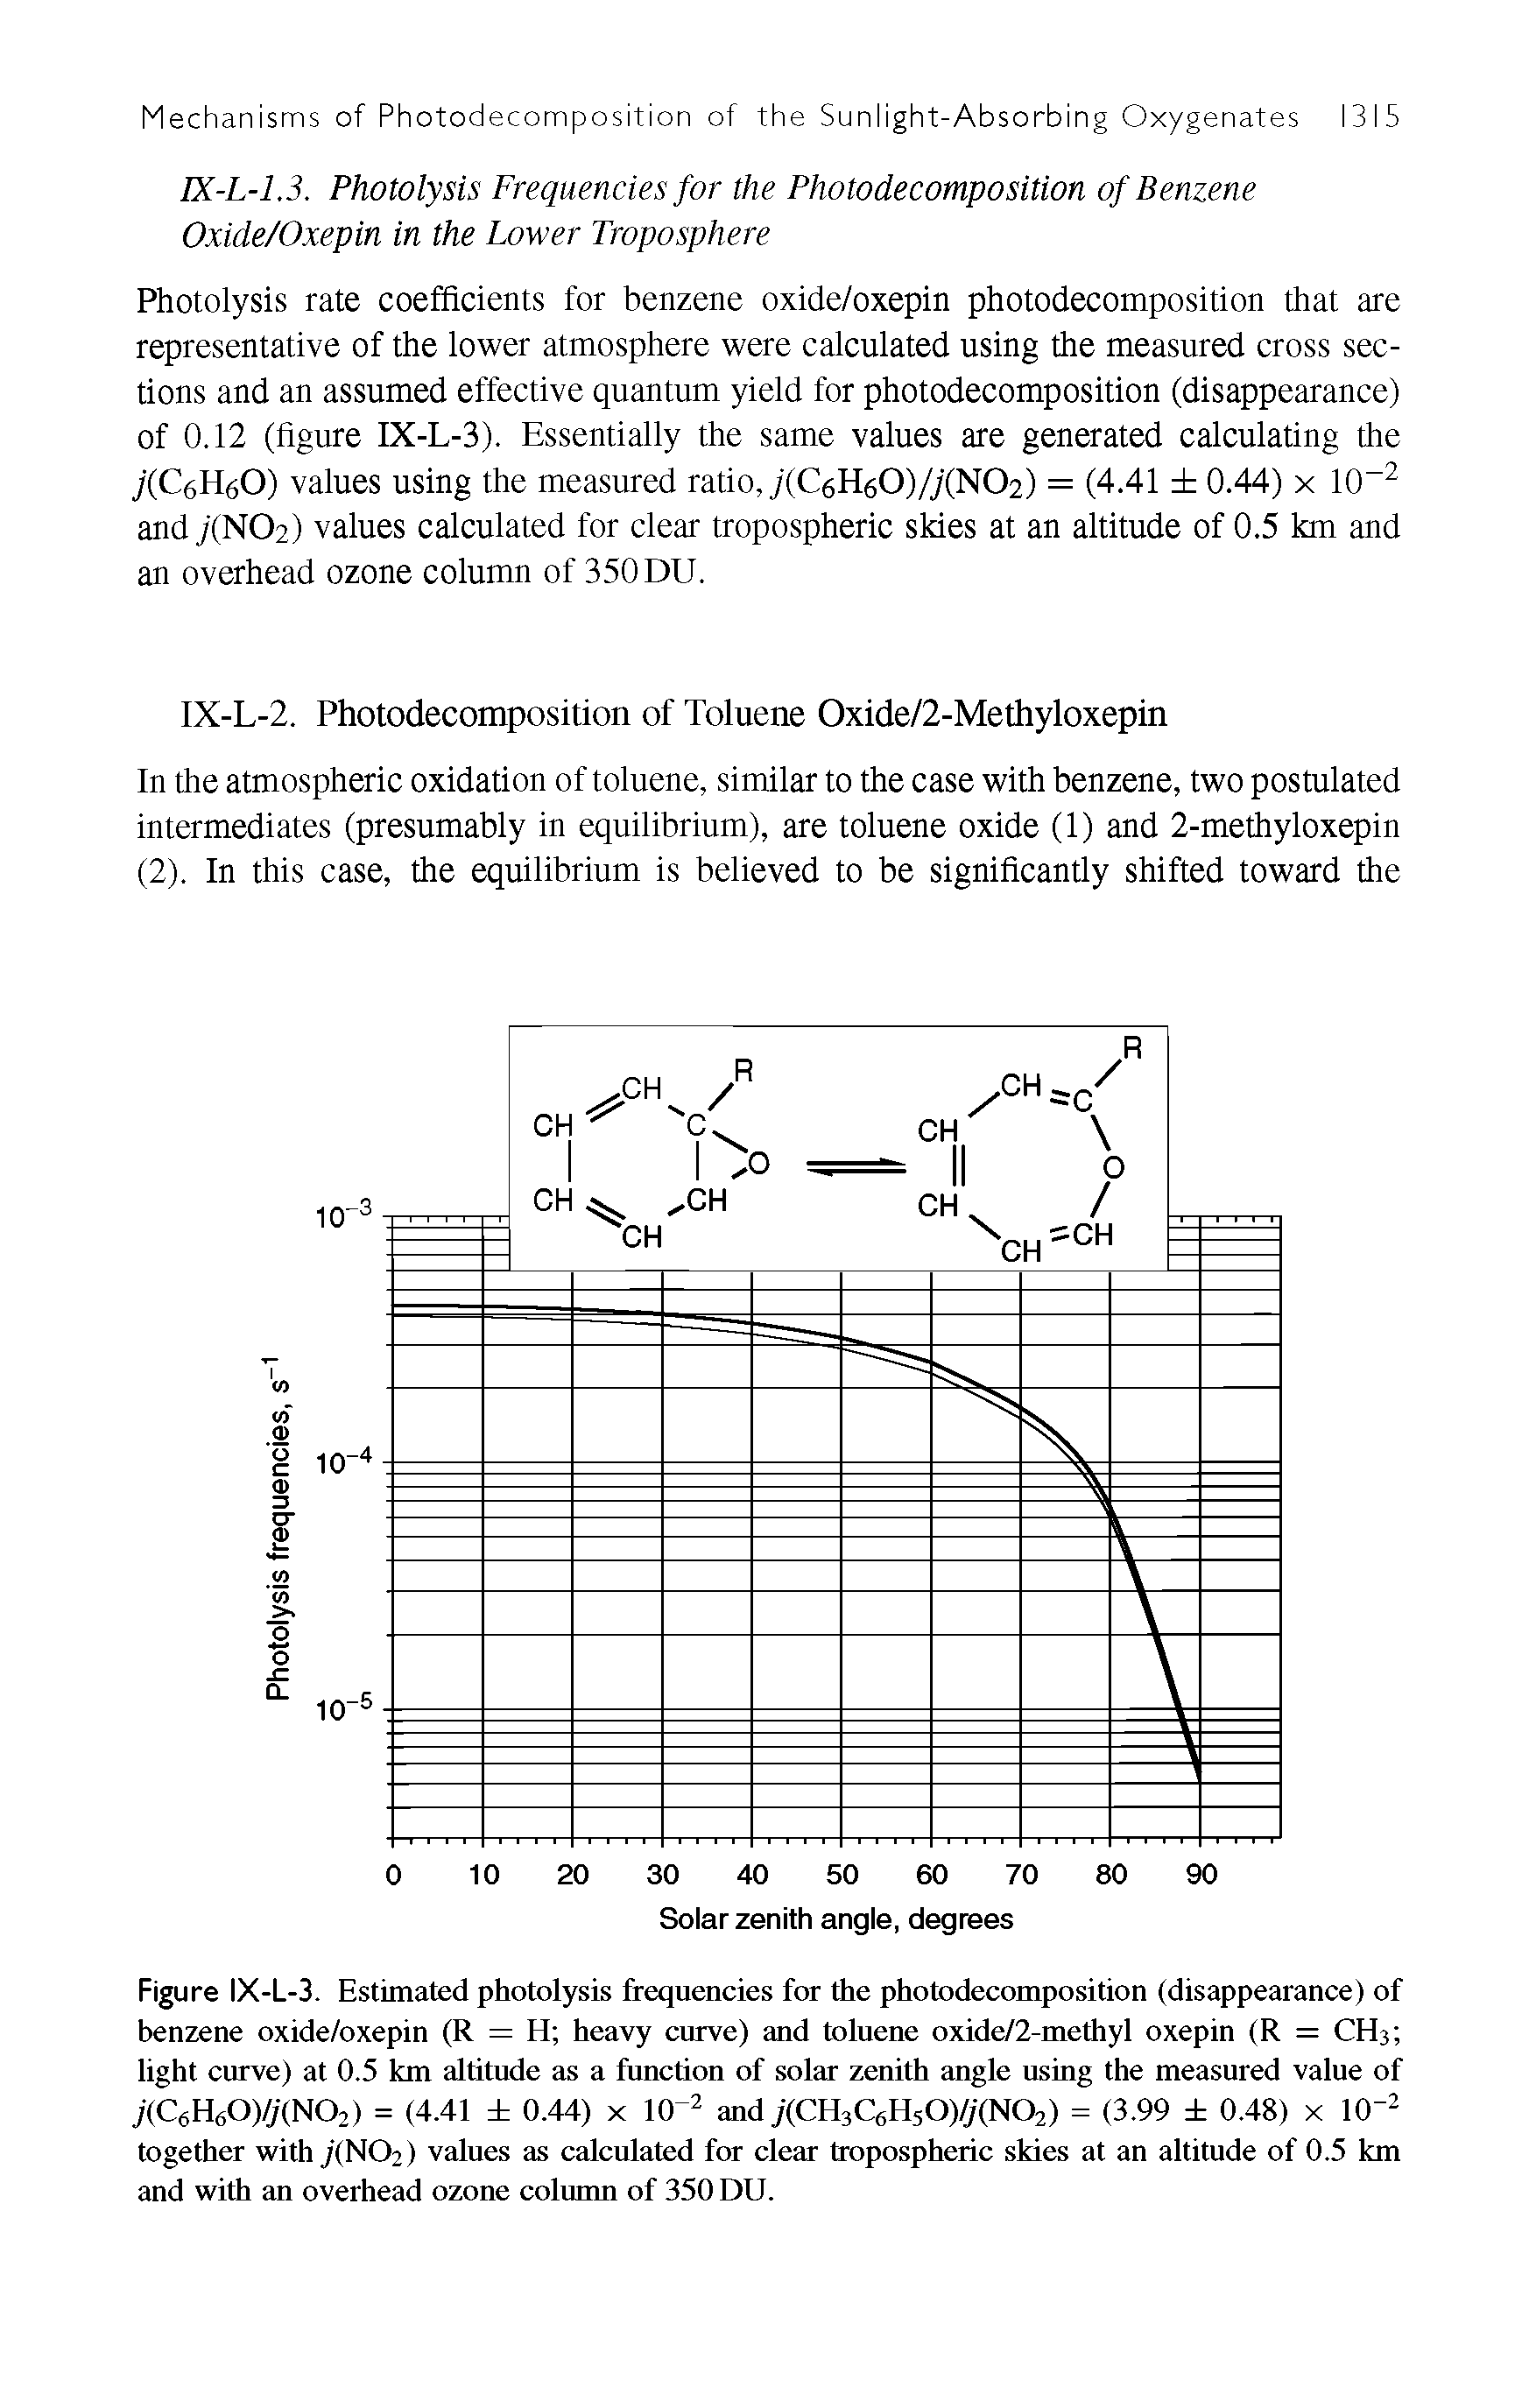 Figure IX-L-3. Estimated photolysis frequencies for the photodecomposition (disappearance) of benzene oxide/oxepin (R = H heavy curve) and toluene oxide/2-methyl oxepin (R = CH3 light curve) at 0.5 km altitude as a function of solar zenith angle using the measured value of yXCsHfiOf/jXNO ) = (4.41 0.44) x 10 and j(CH3C6H50)/jr(N02) = (3.99 0.48) x together with 7(N02) values as calculated for clear tropospheric skies at an altitude of 0.5 km and with an overhead ozone column of 350 DU.